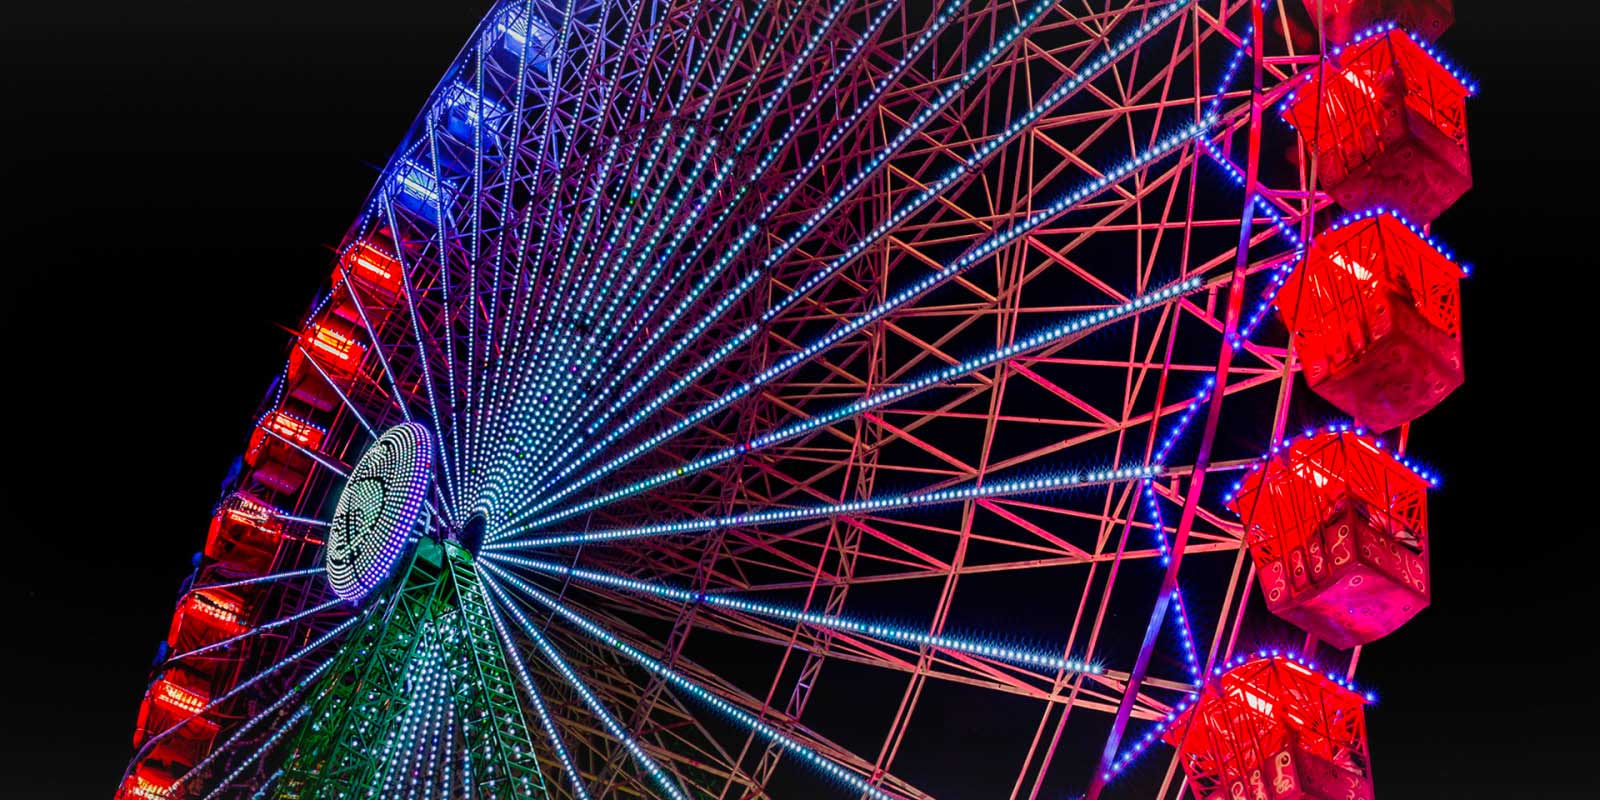 A brightly-lit, rainbow-colored ferris wheel against a black night sky, captured from a low angle.